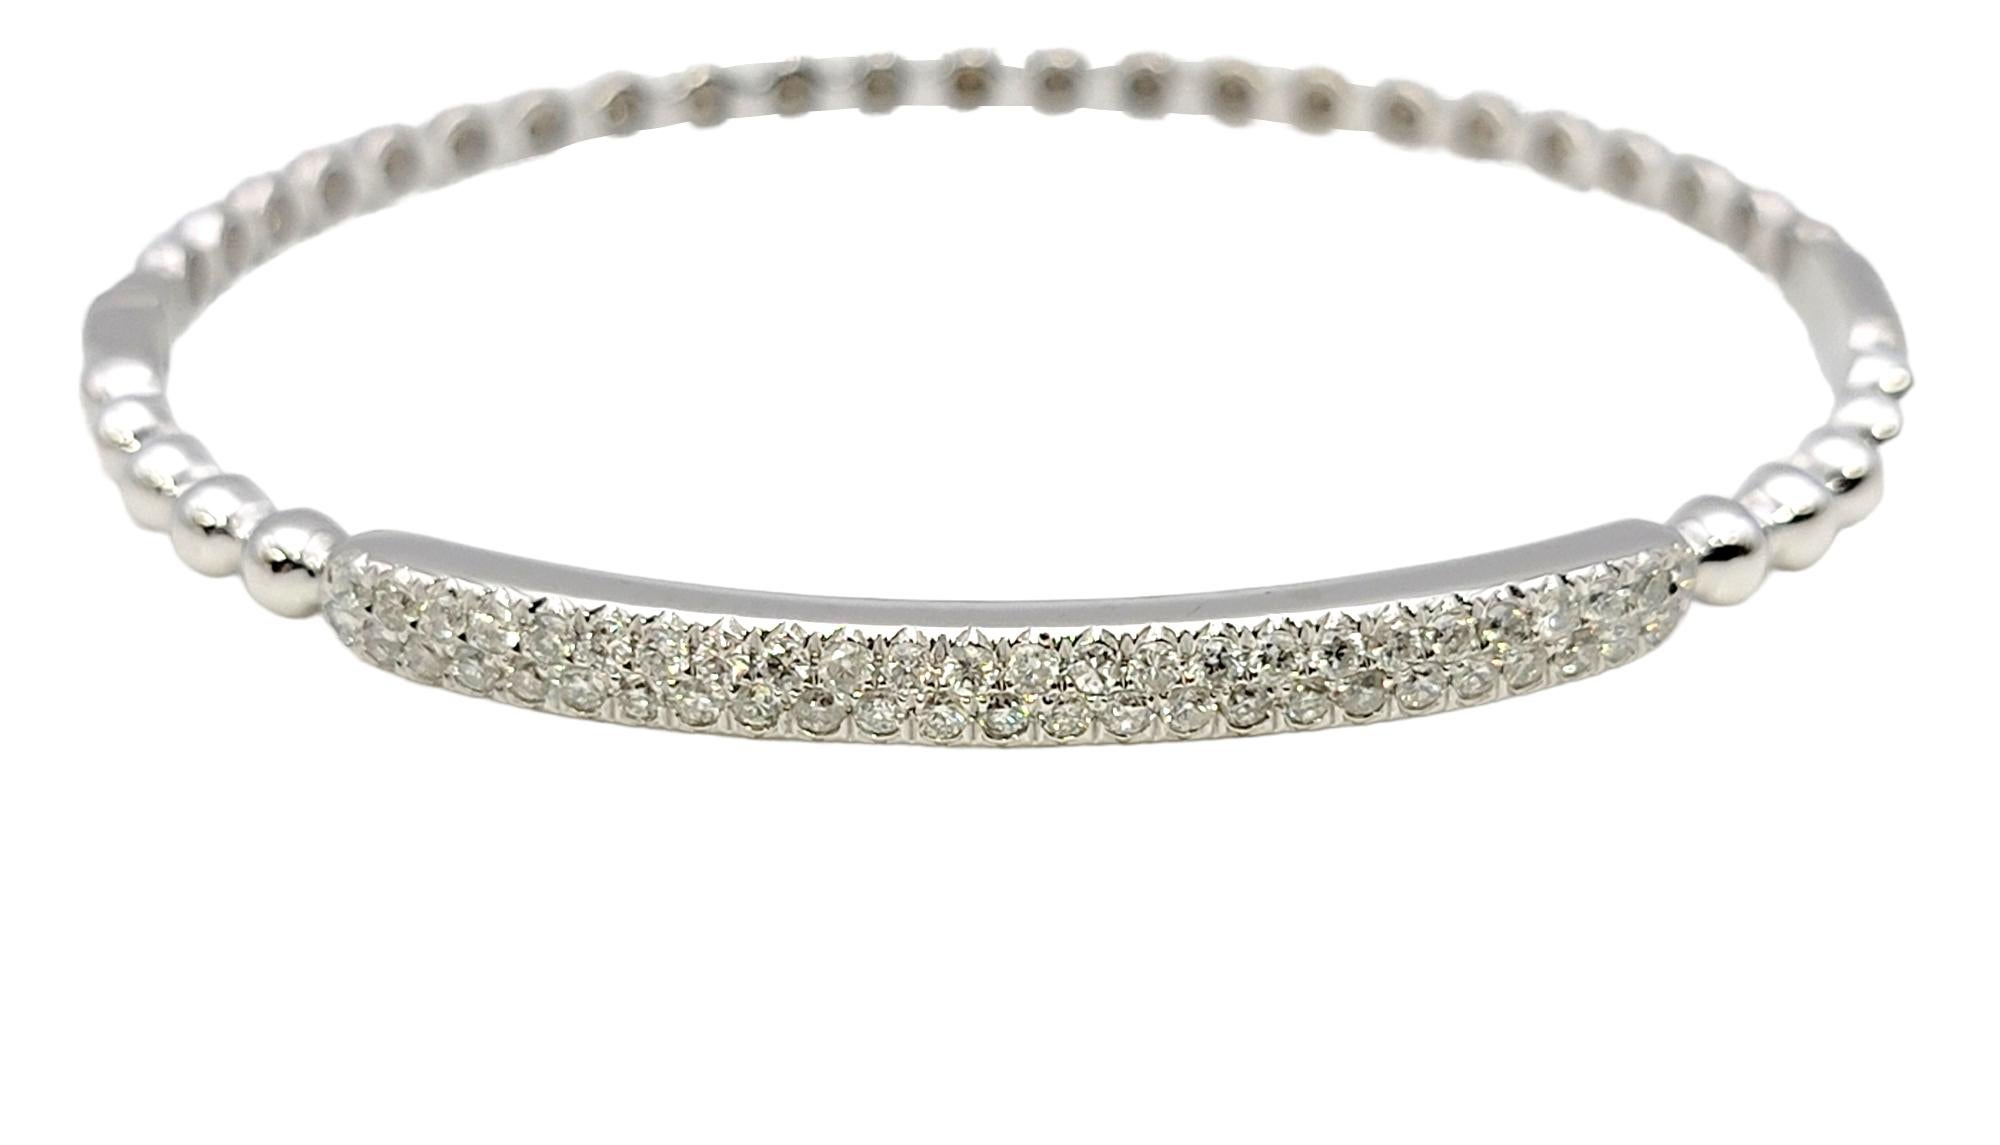 Contemporary bangle bracelet in a 14K white gold featuring a narrow bubble design. The top portion of the sleek bracelet is adorned with two elegant row of sparkling pave diamonds. Stack it with other bracelets for a modern look, or simply wear on